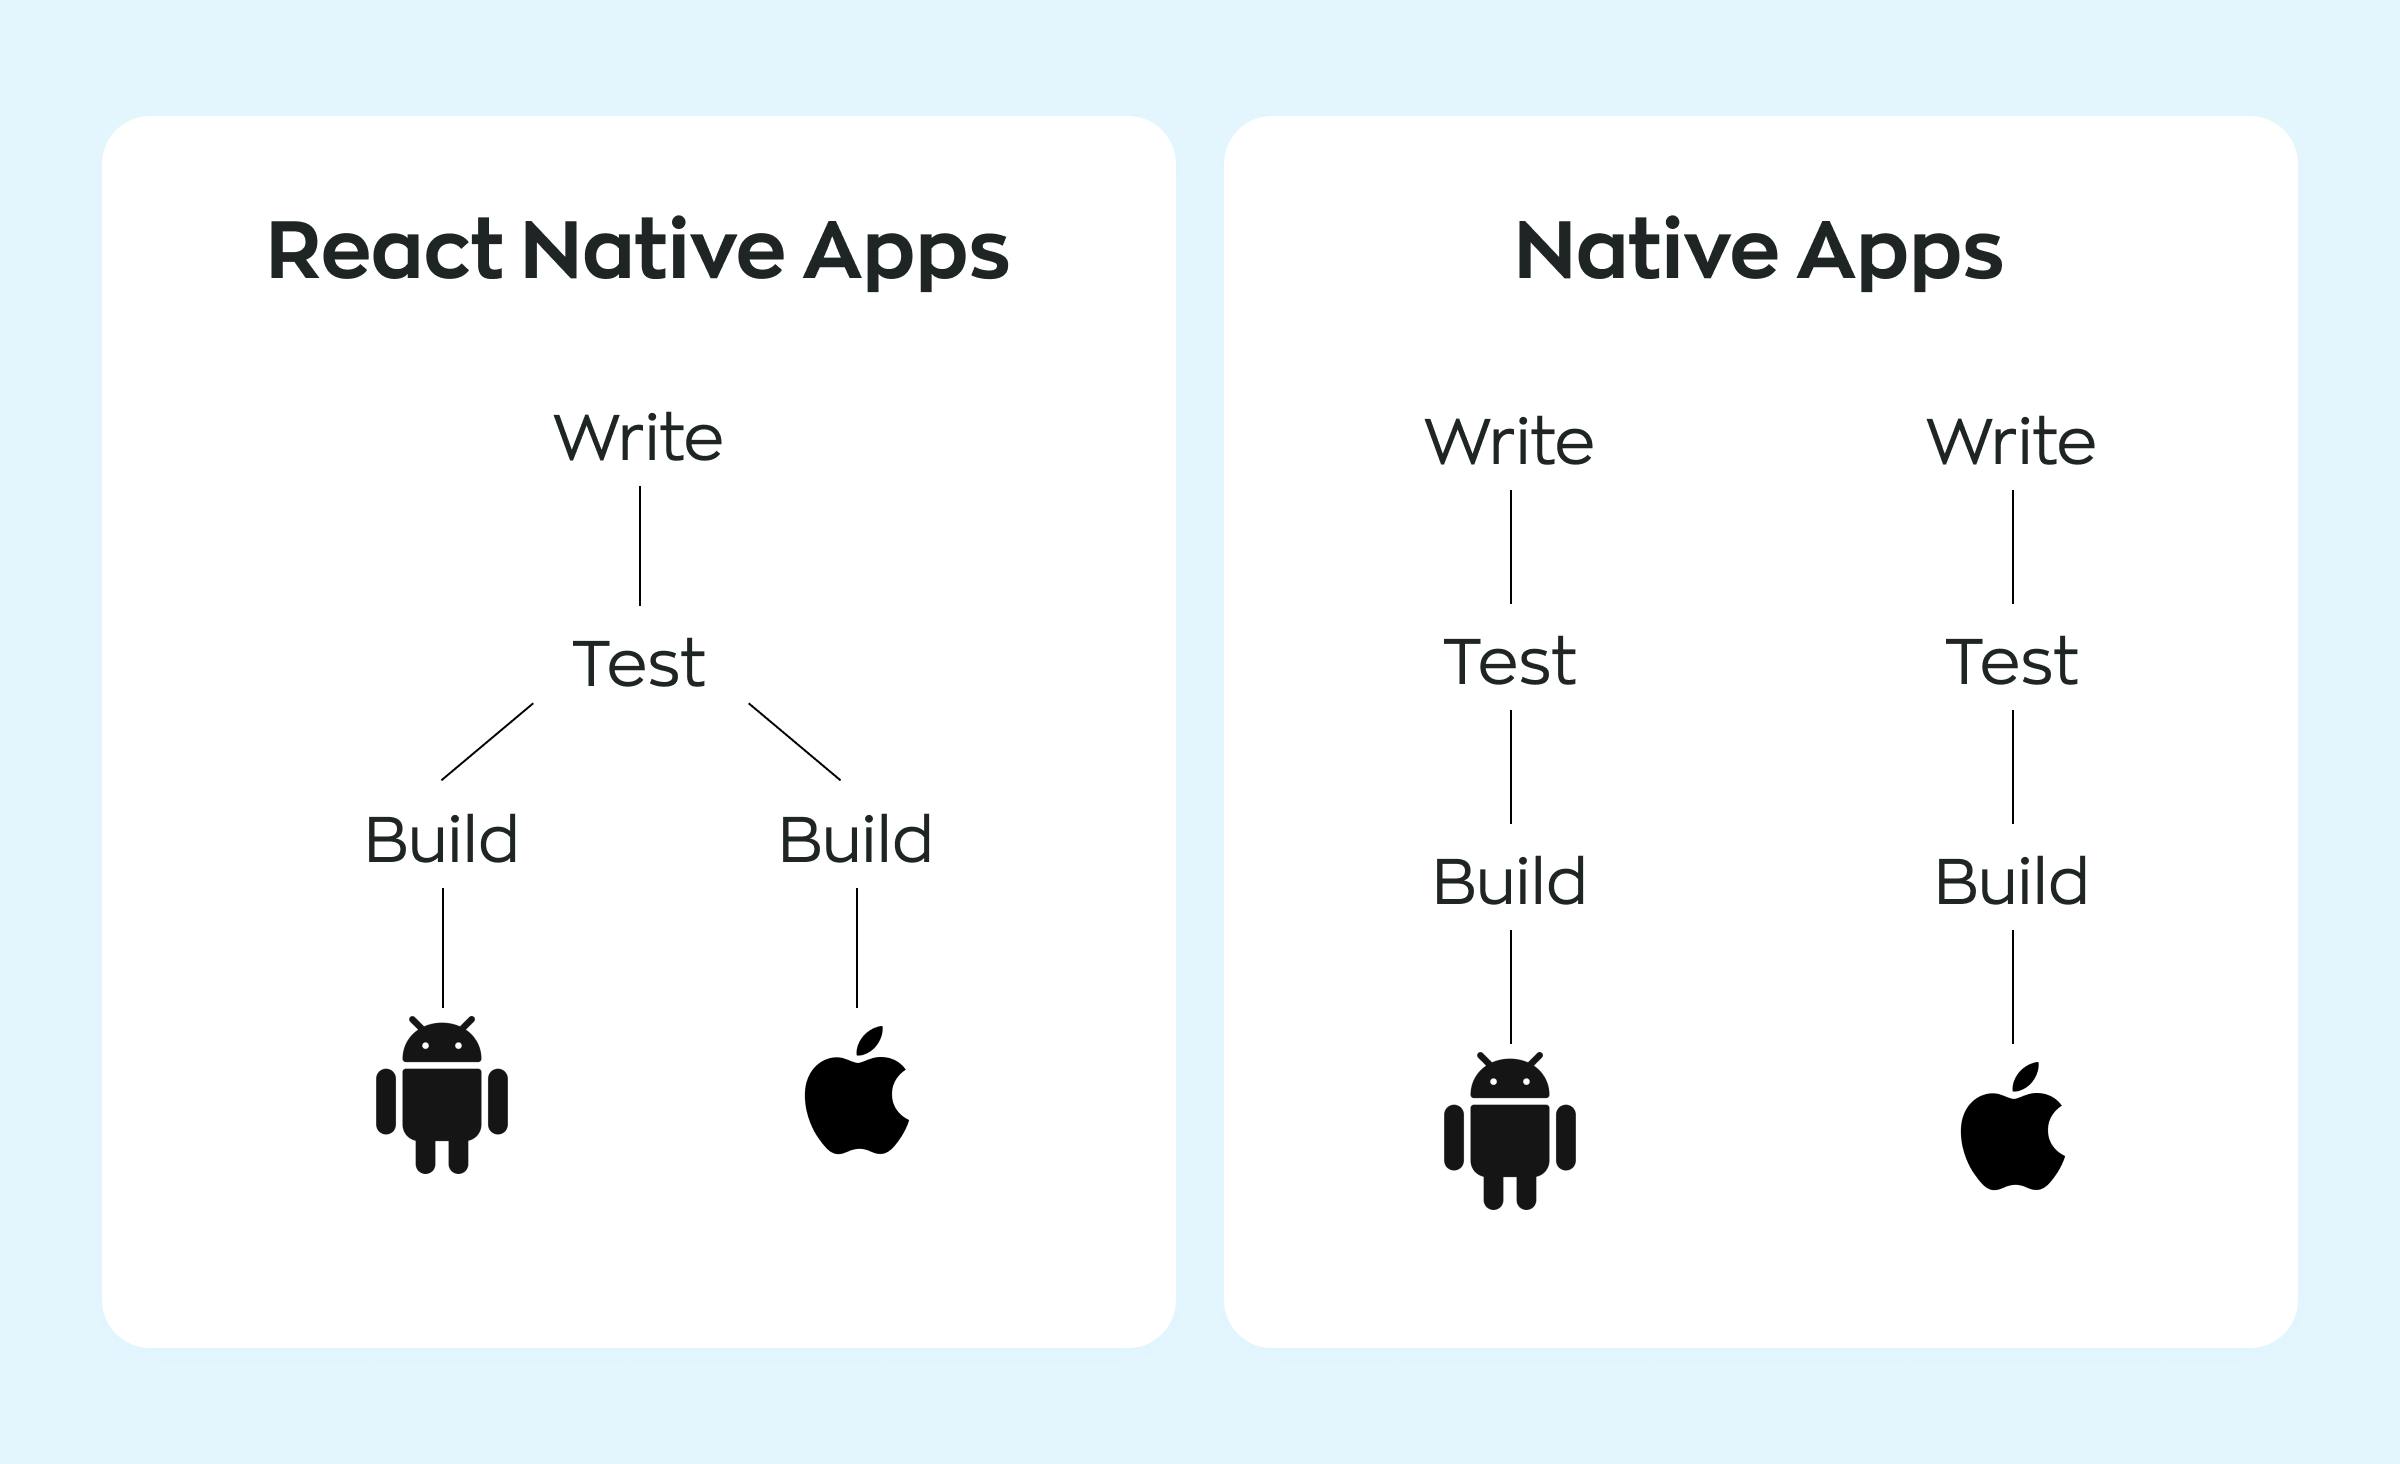 A compaison between the React Native and native app development workflows. Whereas React Native requires only writing and testing once, native development implies coding and running tests for each platform.